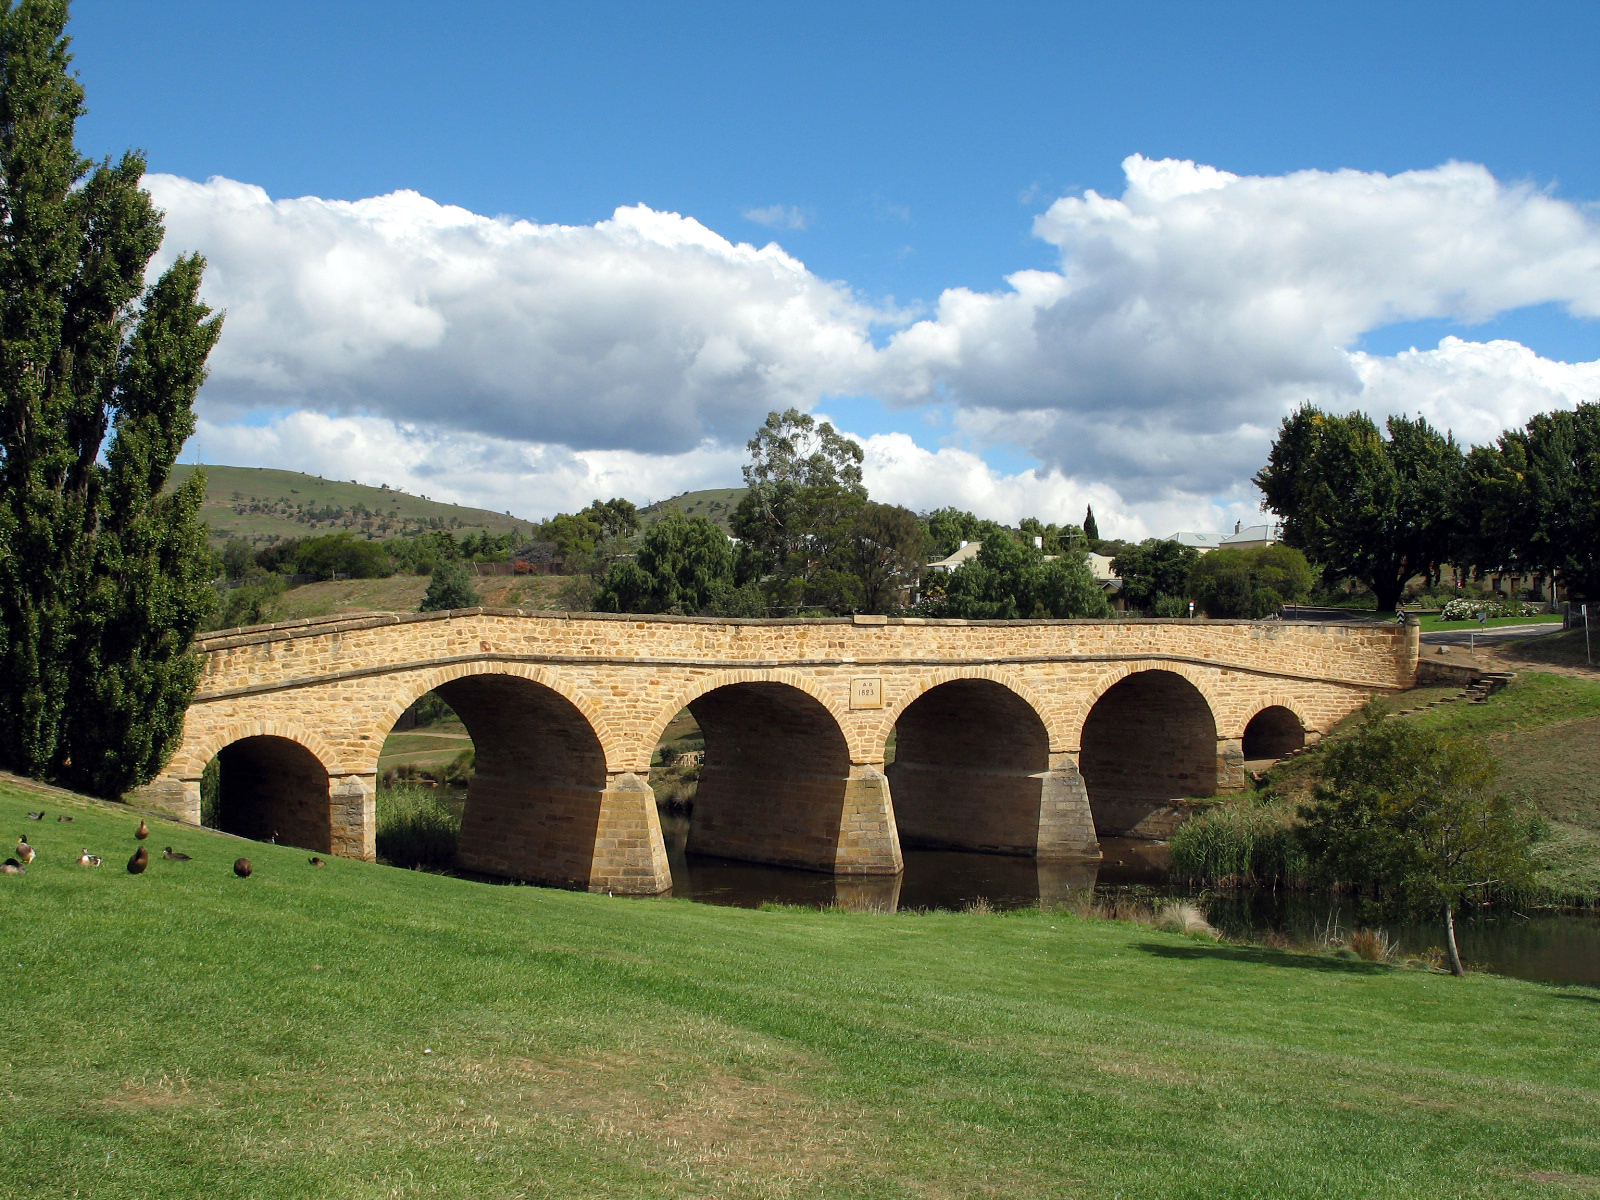 By Convict Labour And Is The Oldest Stone Bridge In Australia